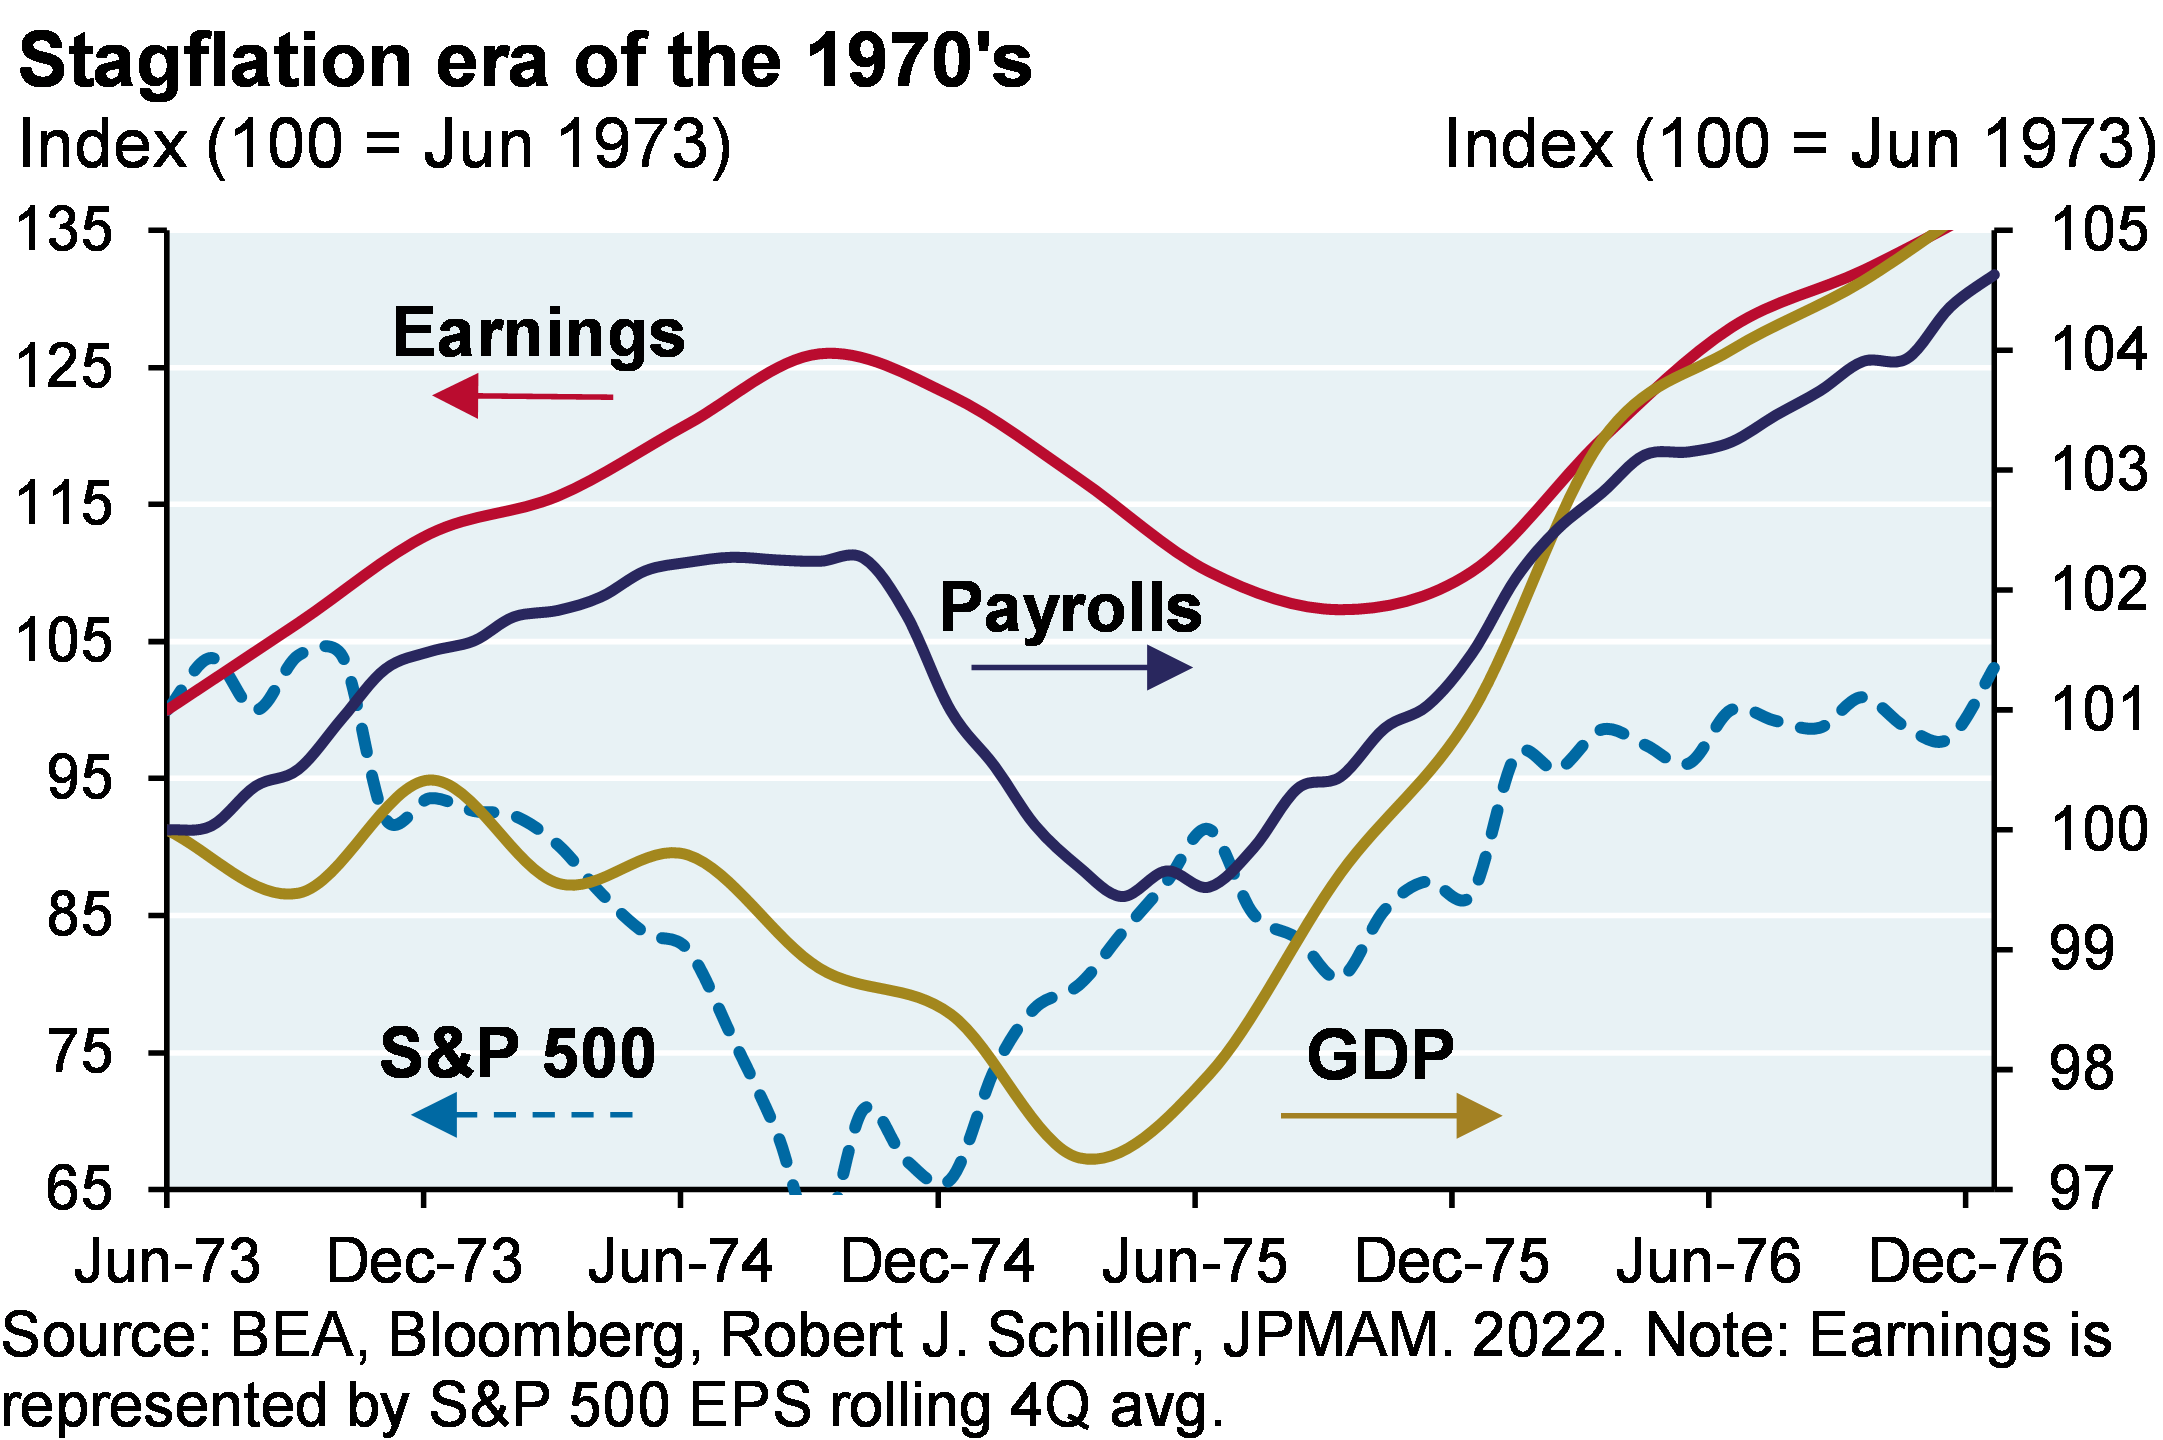 The indexed line chart compares the S&P 500, GDP, Earnings, and Nonfarm Payrolls throughout the Stagflation era recession from June 1973 to December 1976. The S&P 500 bottomed in December 1974, followed by GDP in March 1975, Payrolls in April 1975 and Earnings in September 1975. 